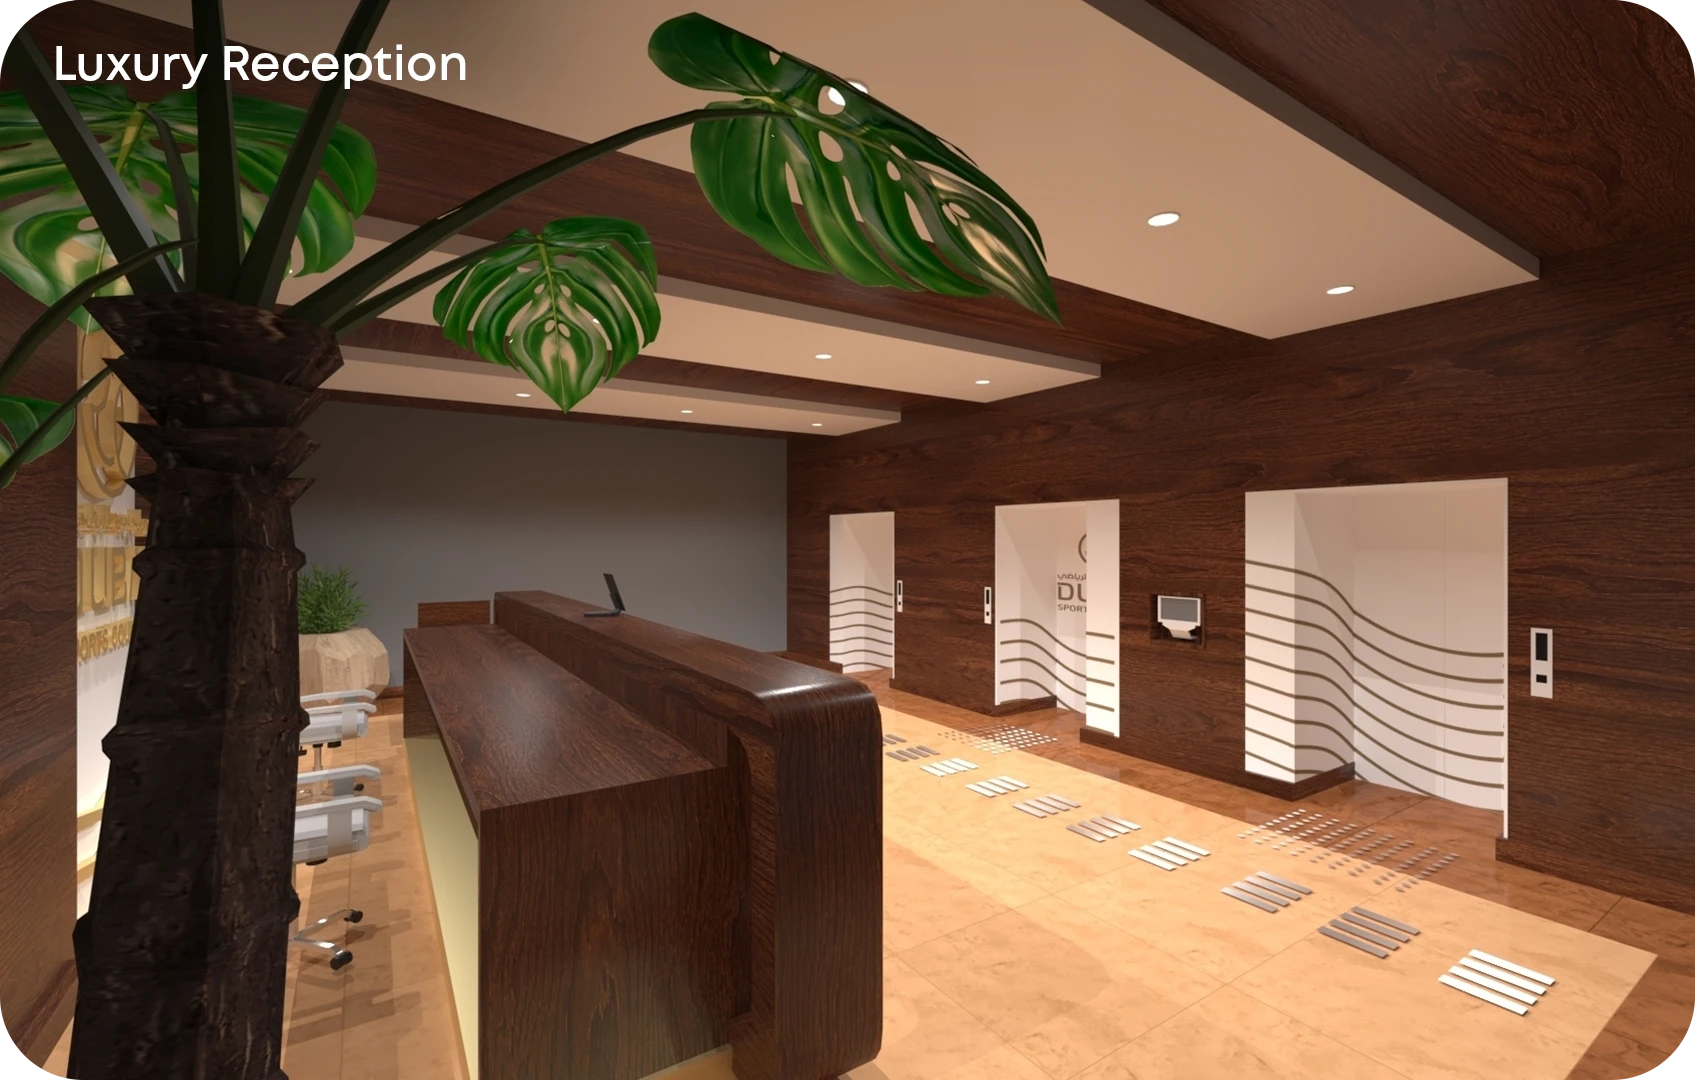 3798-luxury-reception-1.png